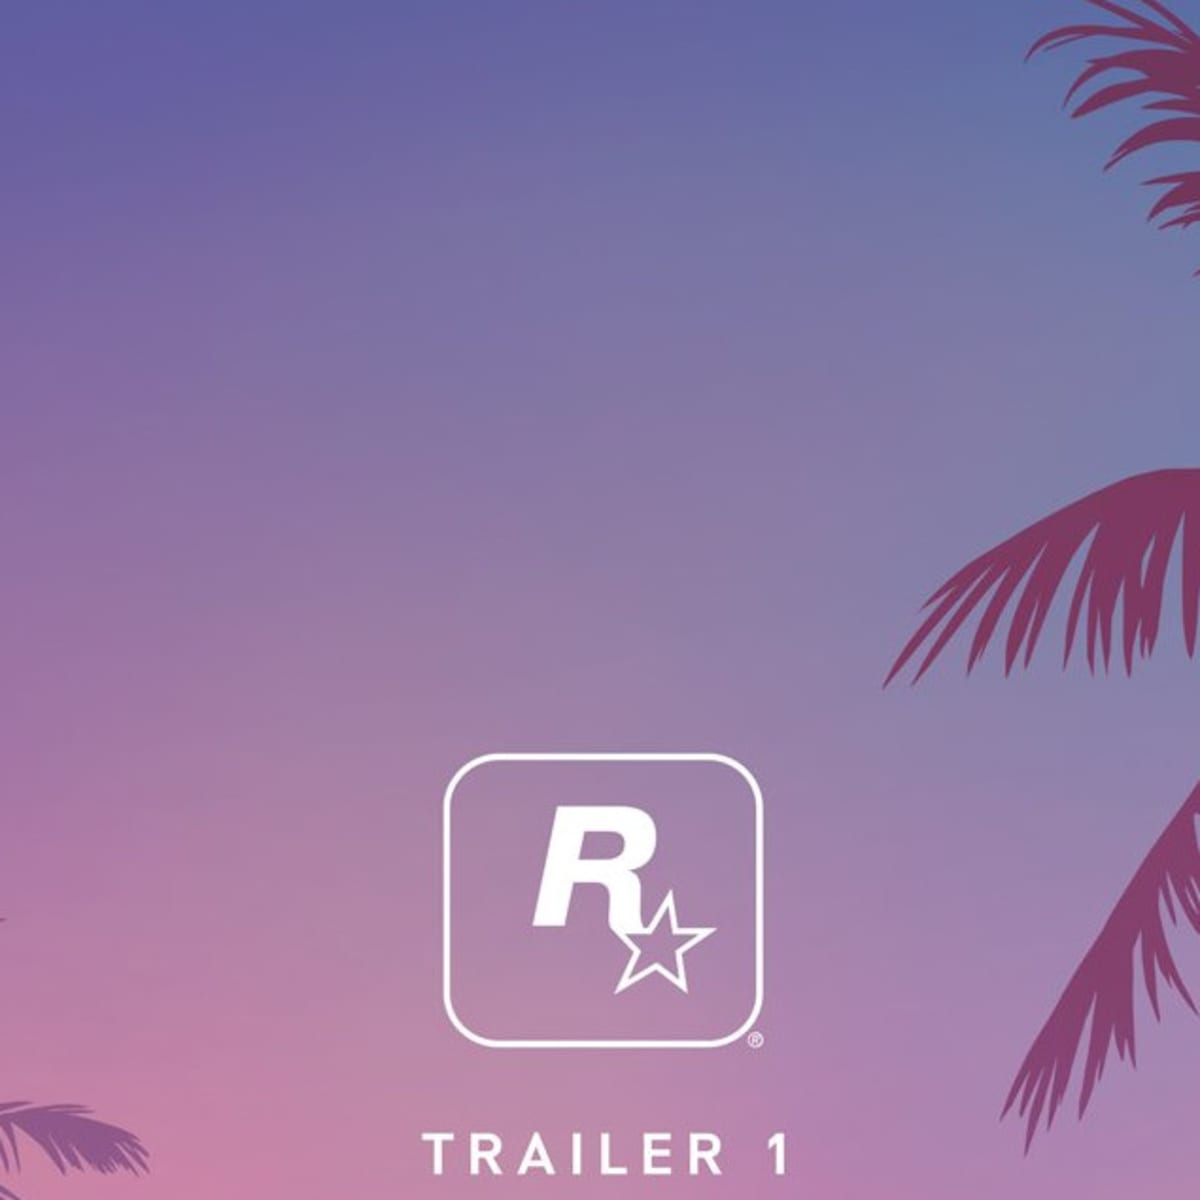 GTA 6 leak appears on TikTok just before the trailer could drop